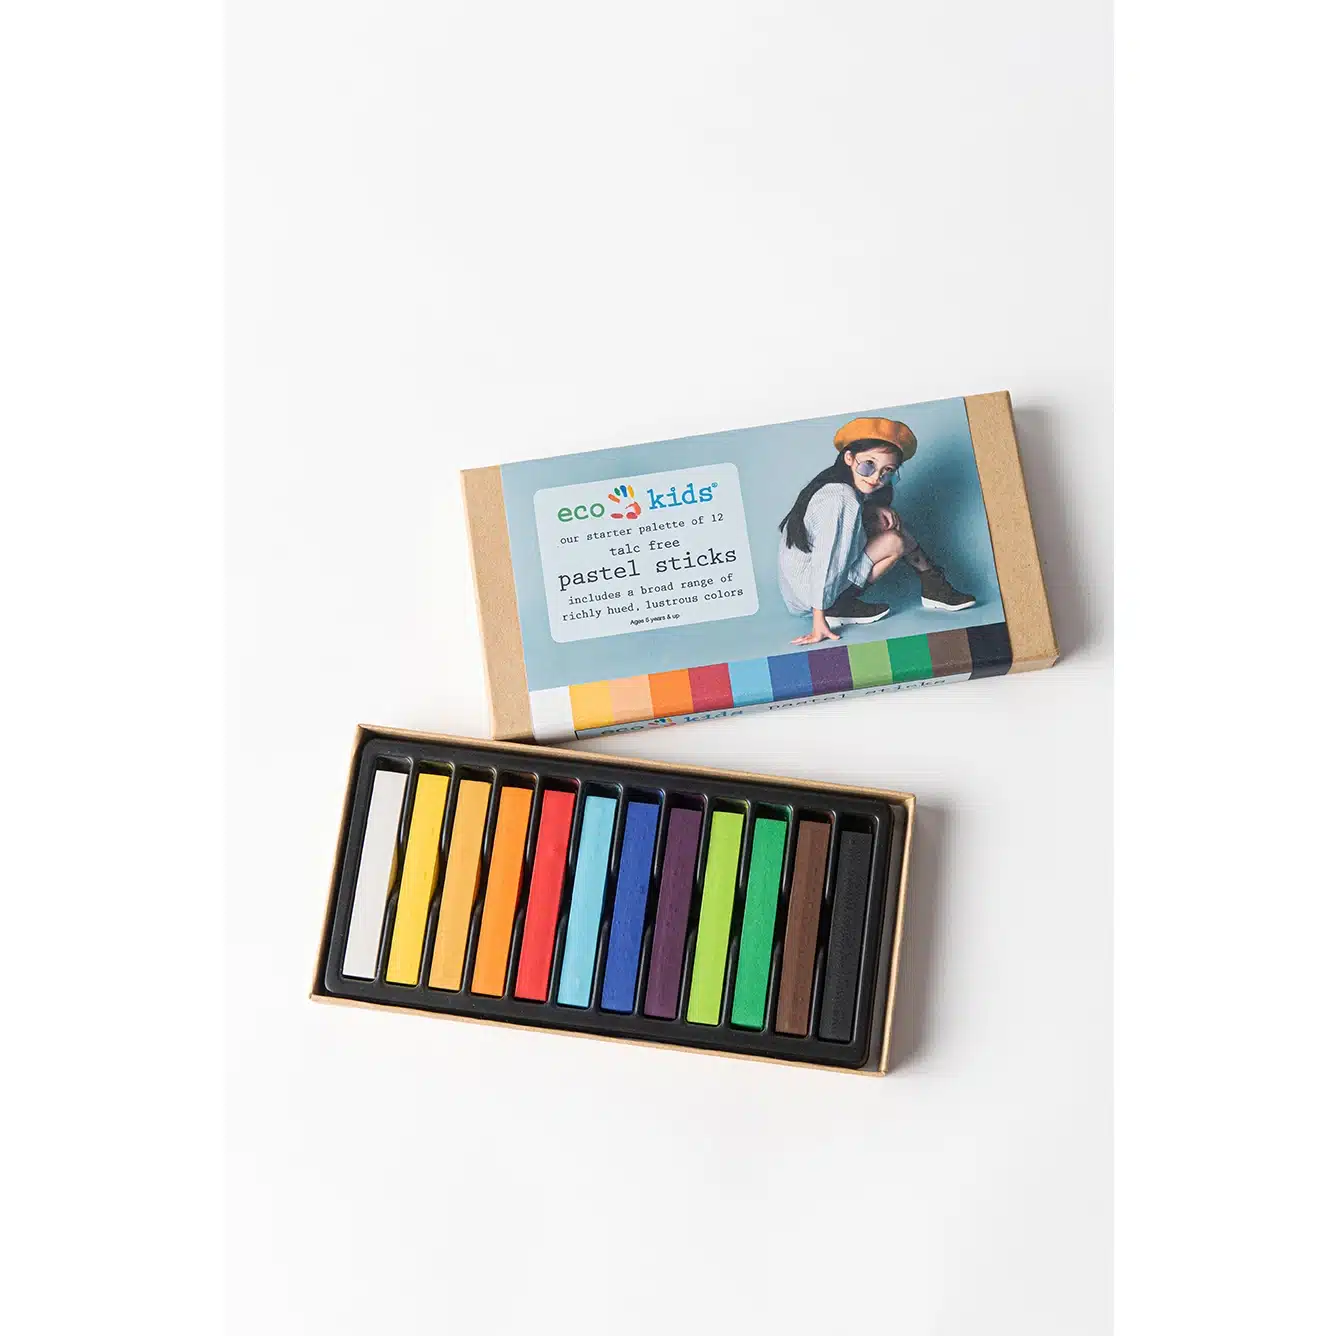 An open box of non-toxic pastels with 12 colors.